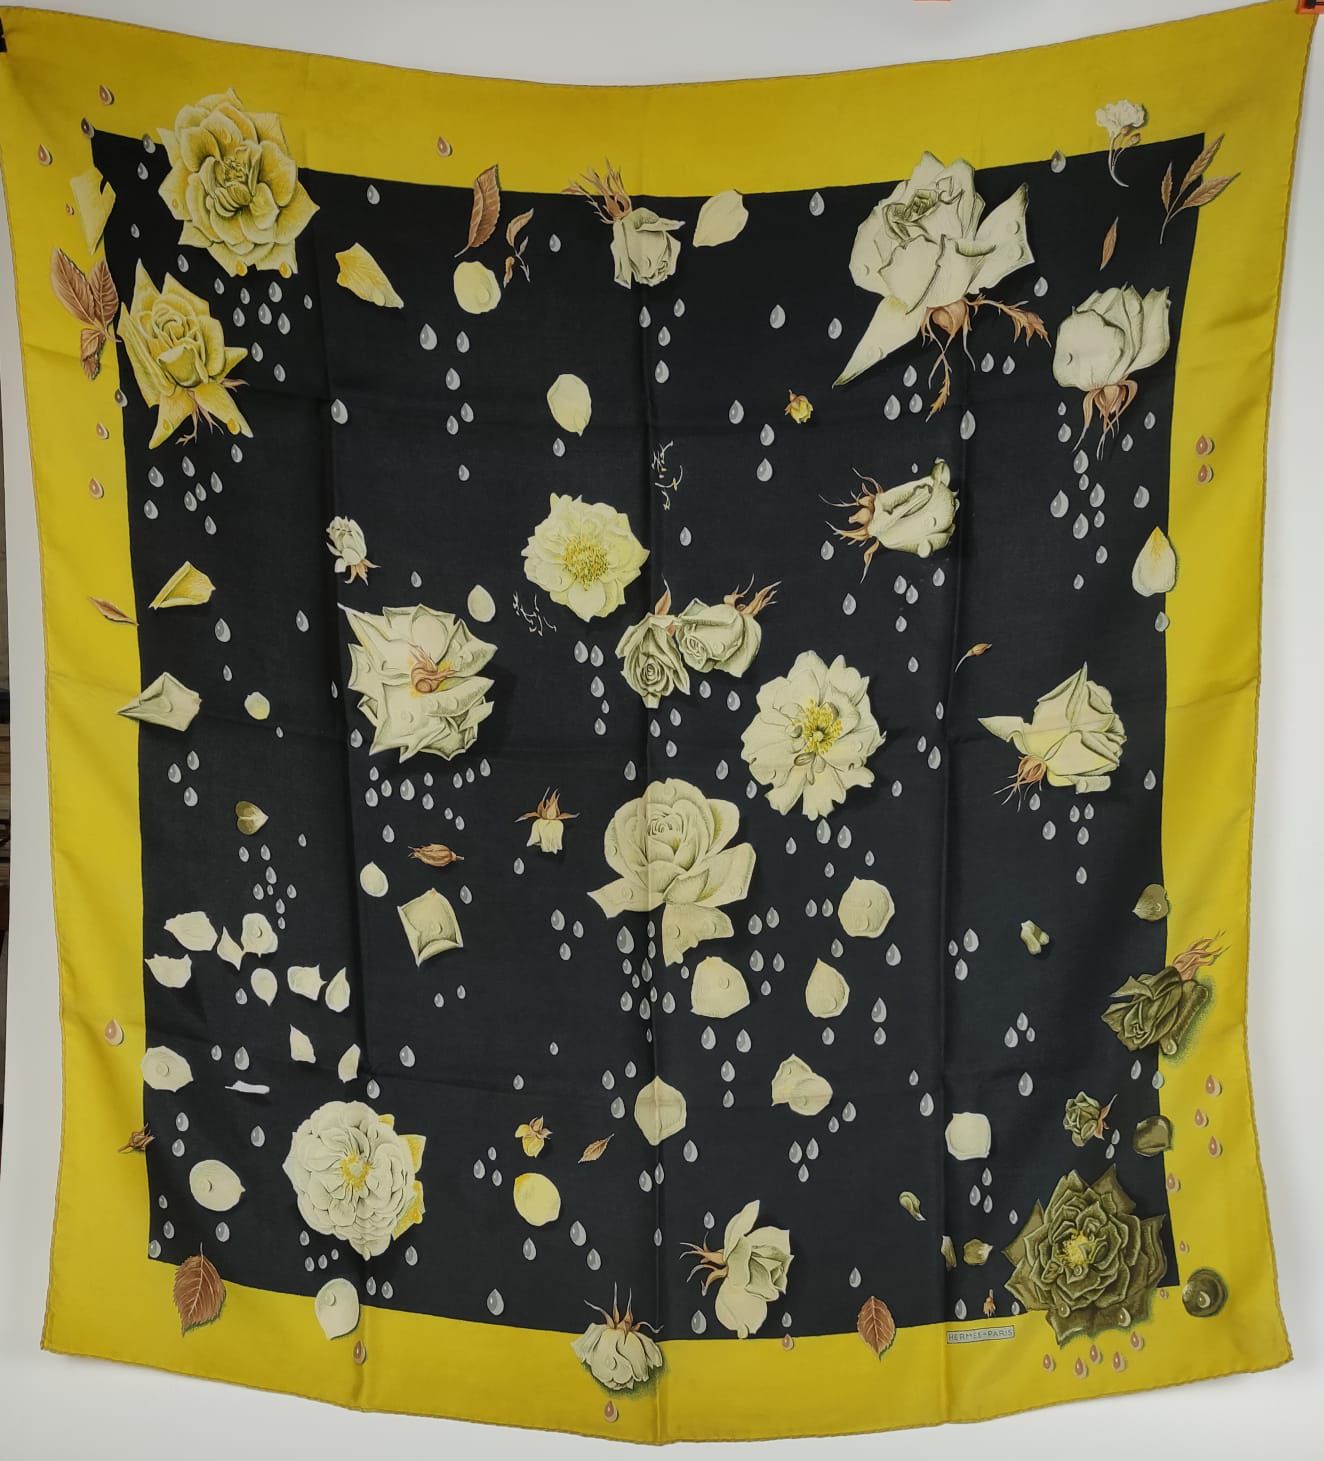 Null HERMES Silk scarf decorated with rosebuds on a black background. Stains